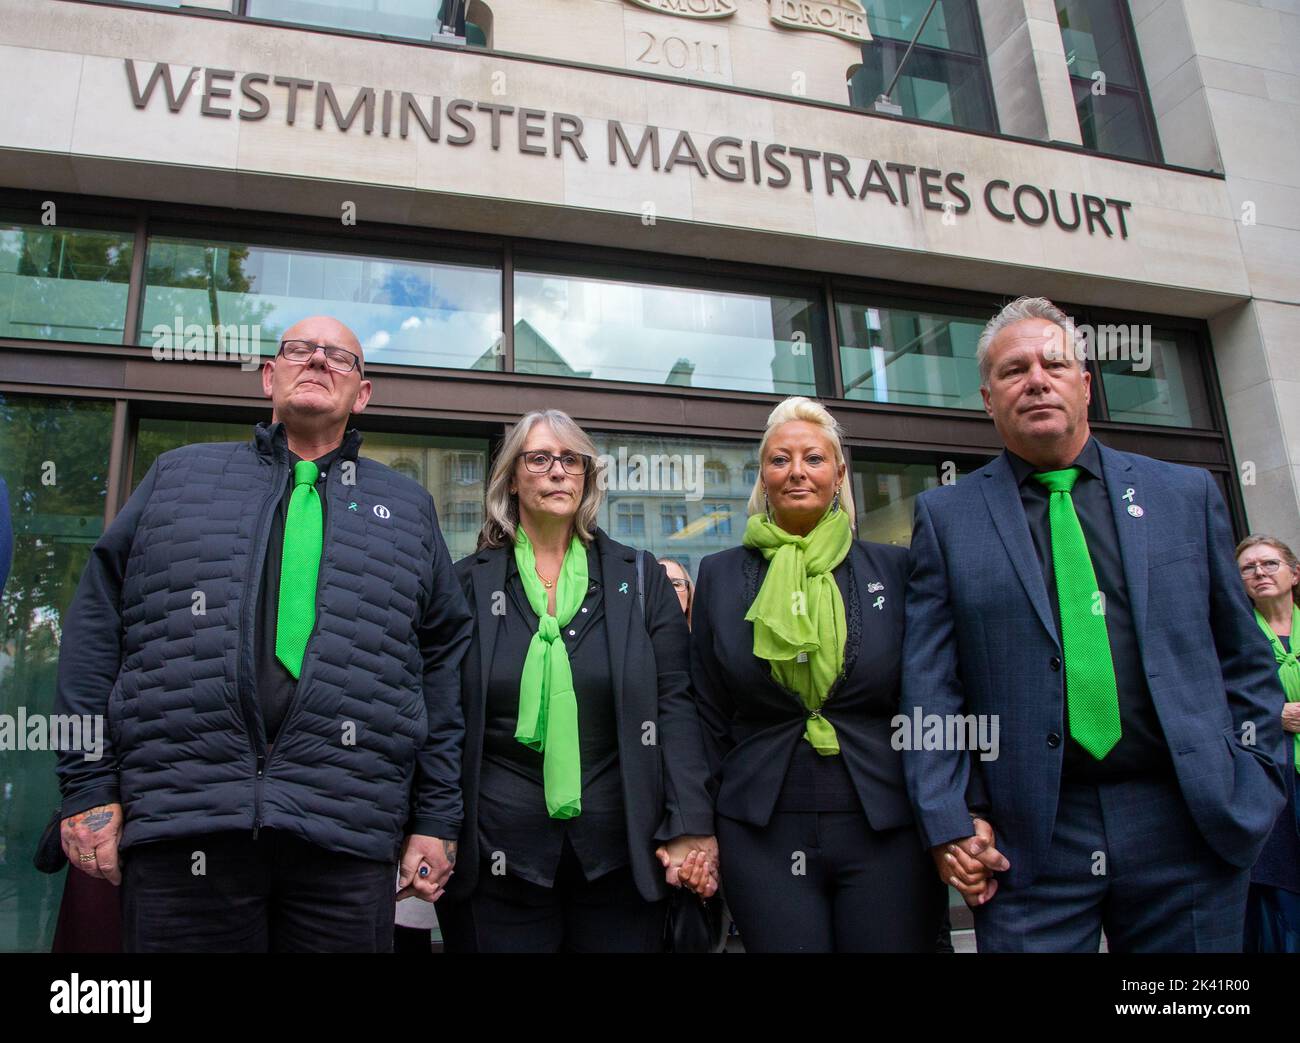 London, England, UK. 29th Sep, 2022. Harry Dunn's father TIM DUNN (1st L) and mother CHARLOTTE CHARLES (3rd L)with their partners are seen outside Westminster Magistrates' Court. Harry Dunn was killed in a car accident by an American diplomat's wife Anne Sacoolas outside the US military base RAF Croughton in Northamptonshire on 27 August 2019. Sacoolas participated in first trial session from US by video link. (Credit Image: © Tayfun Salci/ZUMA Press Wire) Stock Photo